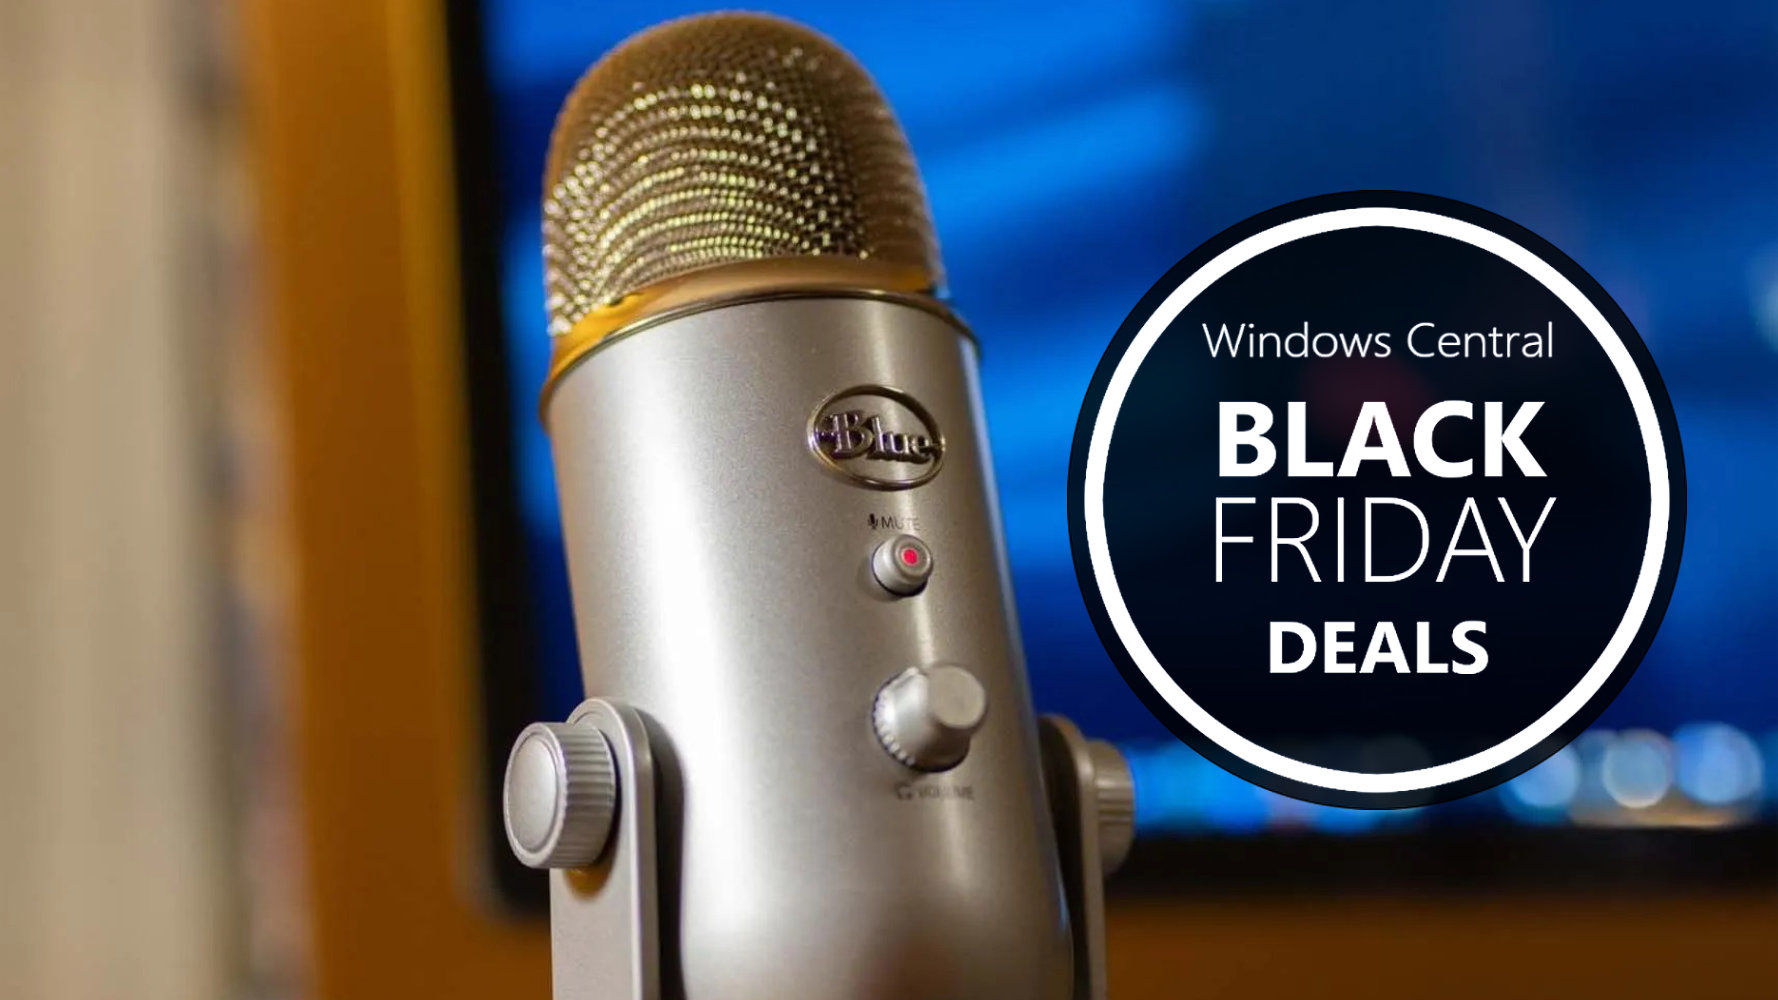 Blue Yeti microphone discounted to $85 for Black Friday